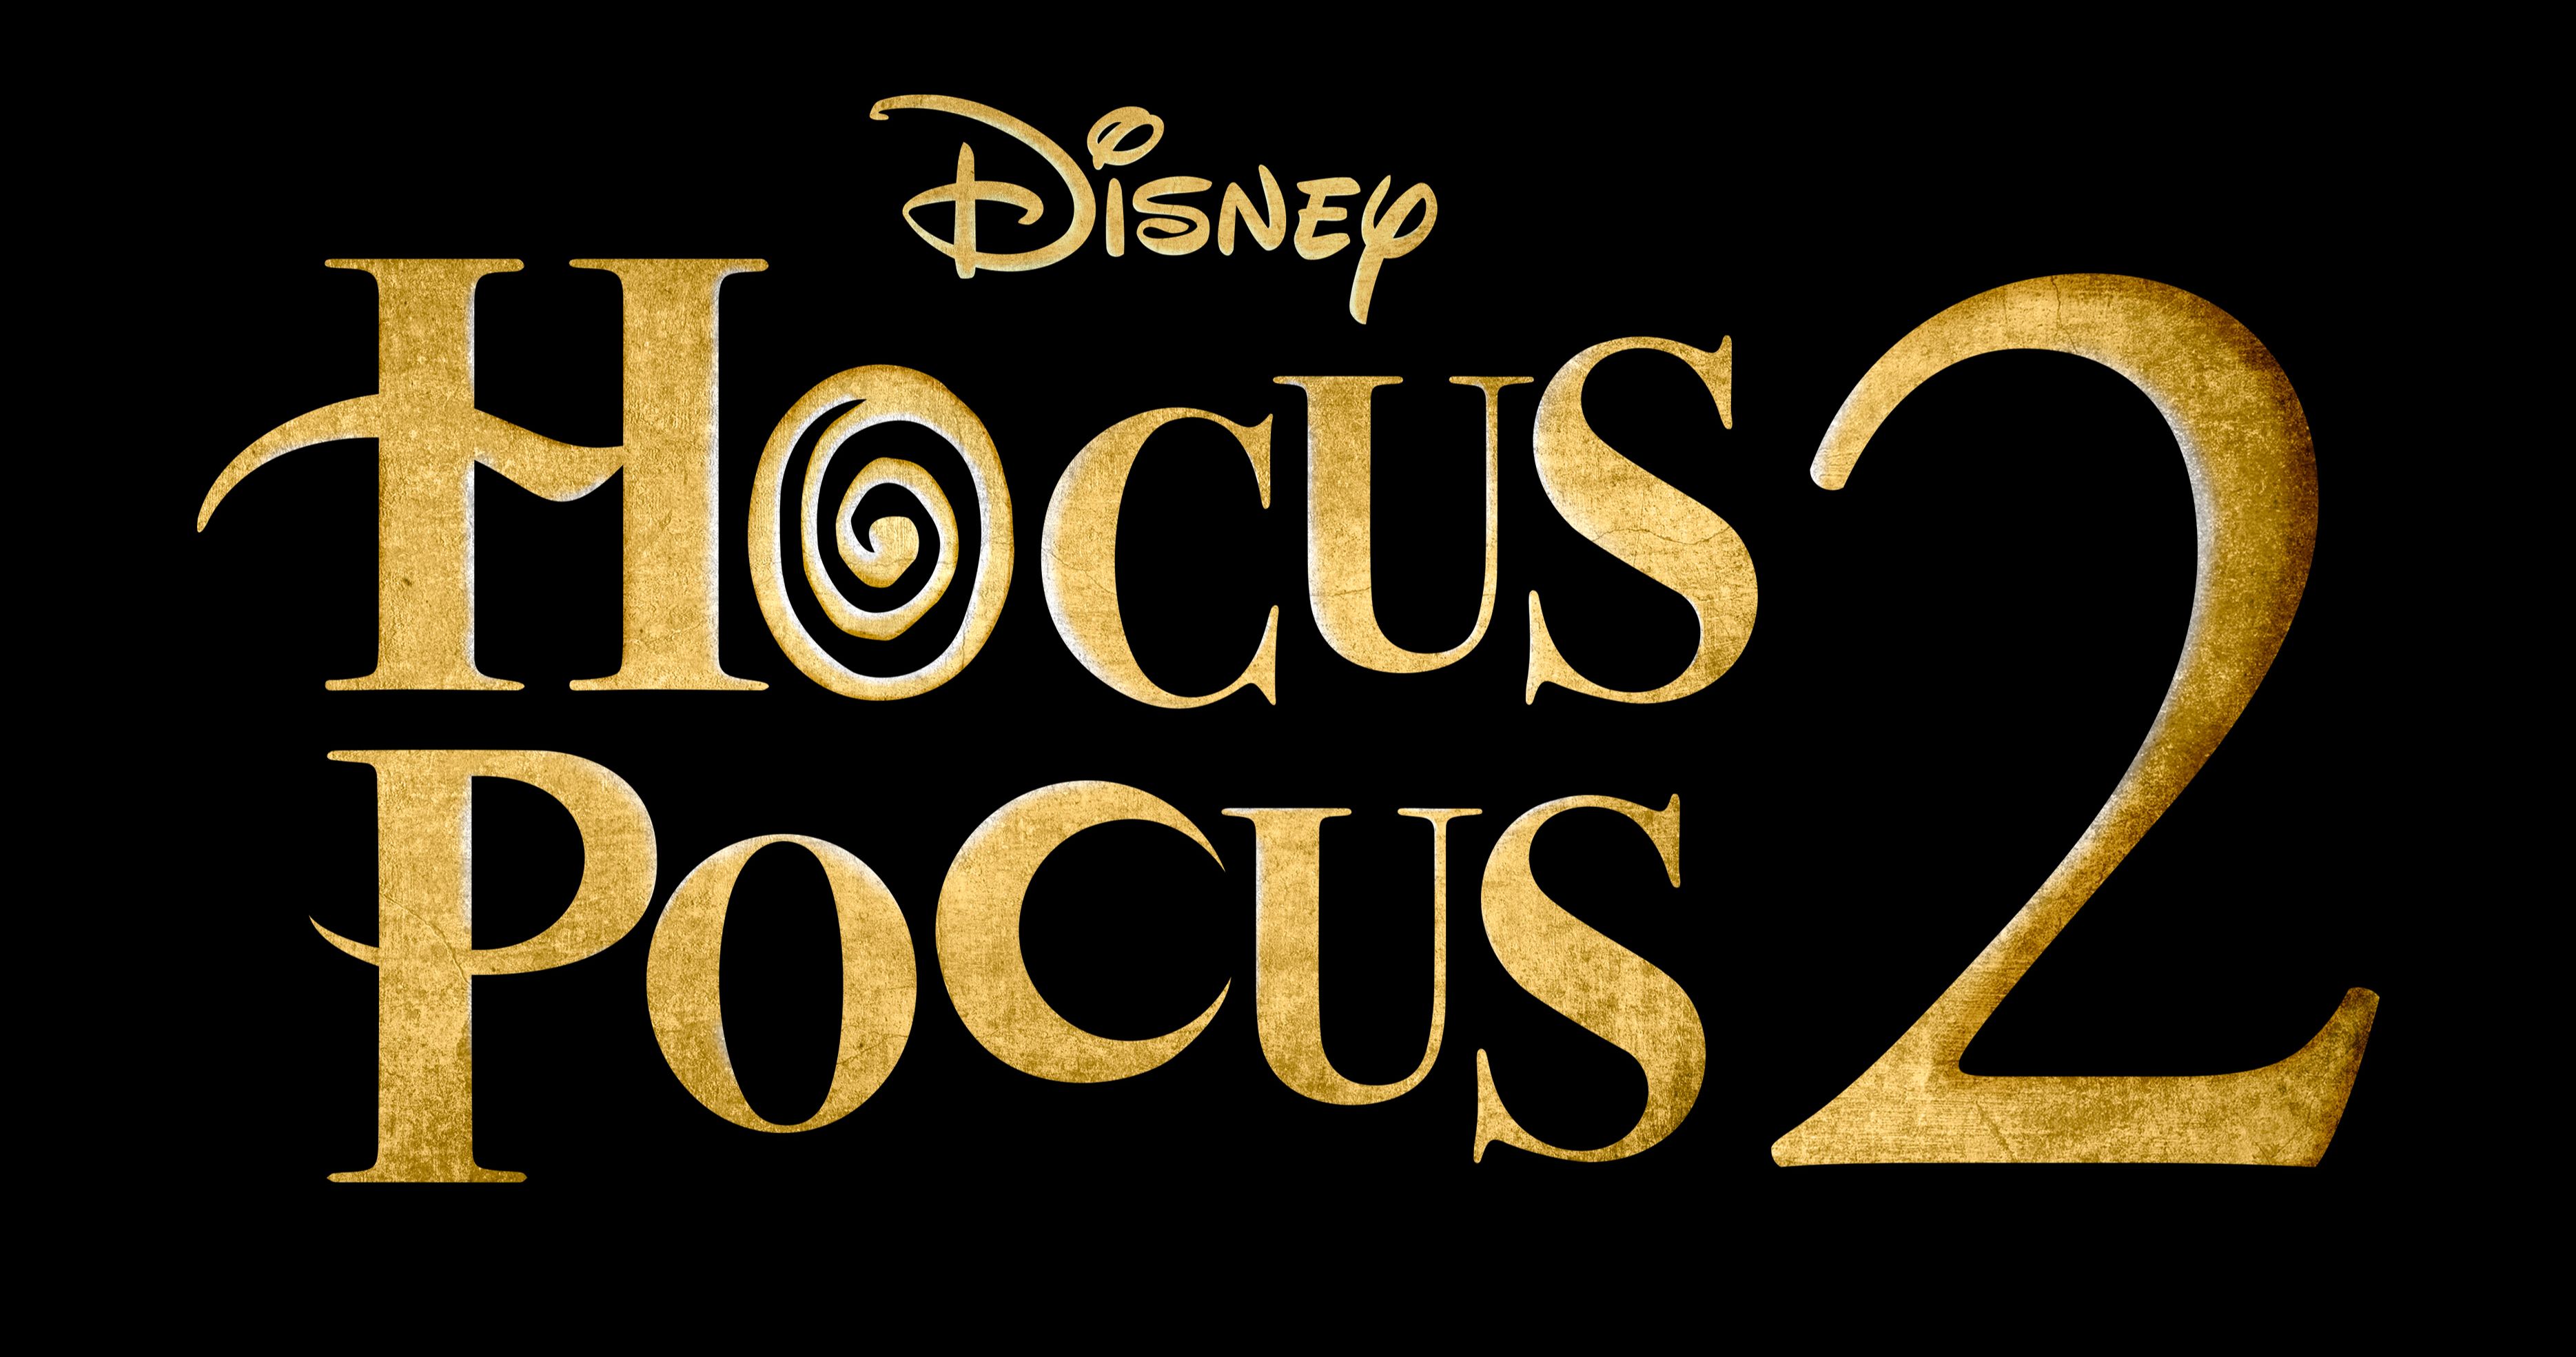 Hocus Pocus 2 Is Coming to Disney+ in 2022 with Original Sanderson Sisters Confirmed to Return